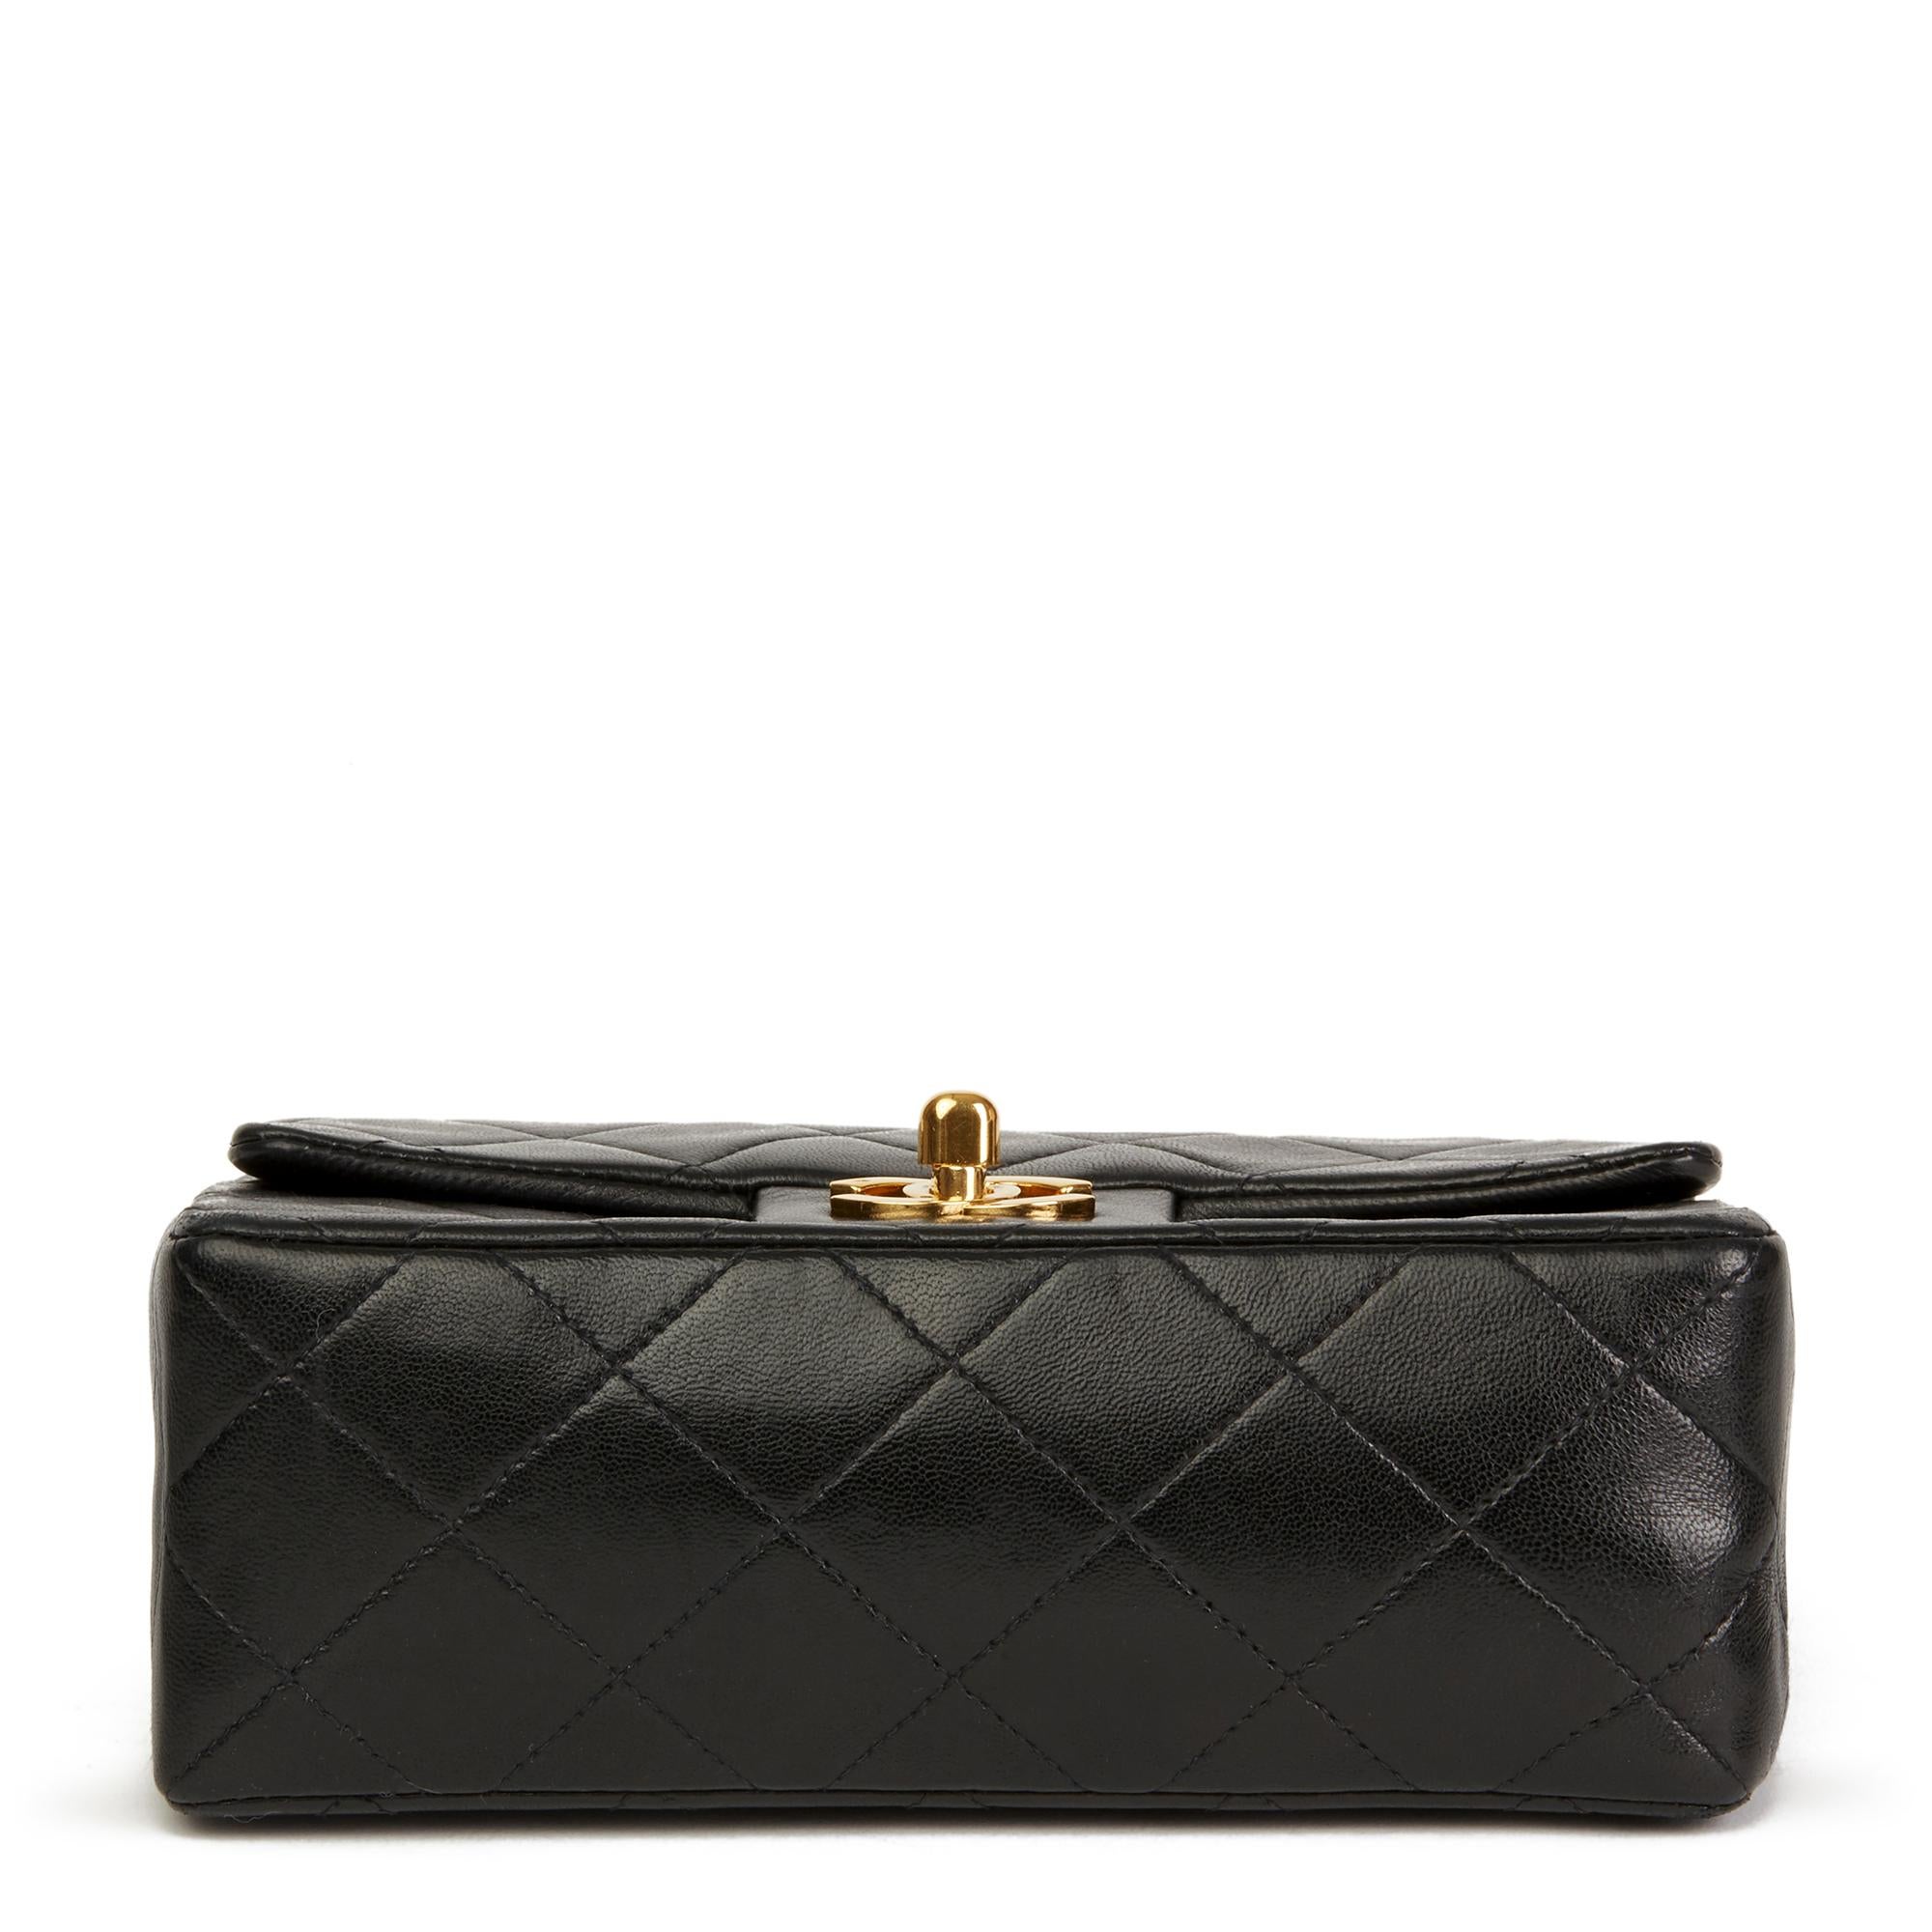 1991 Chanel Black Quilted Lambskin Vintage Mini Flap Bag 11